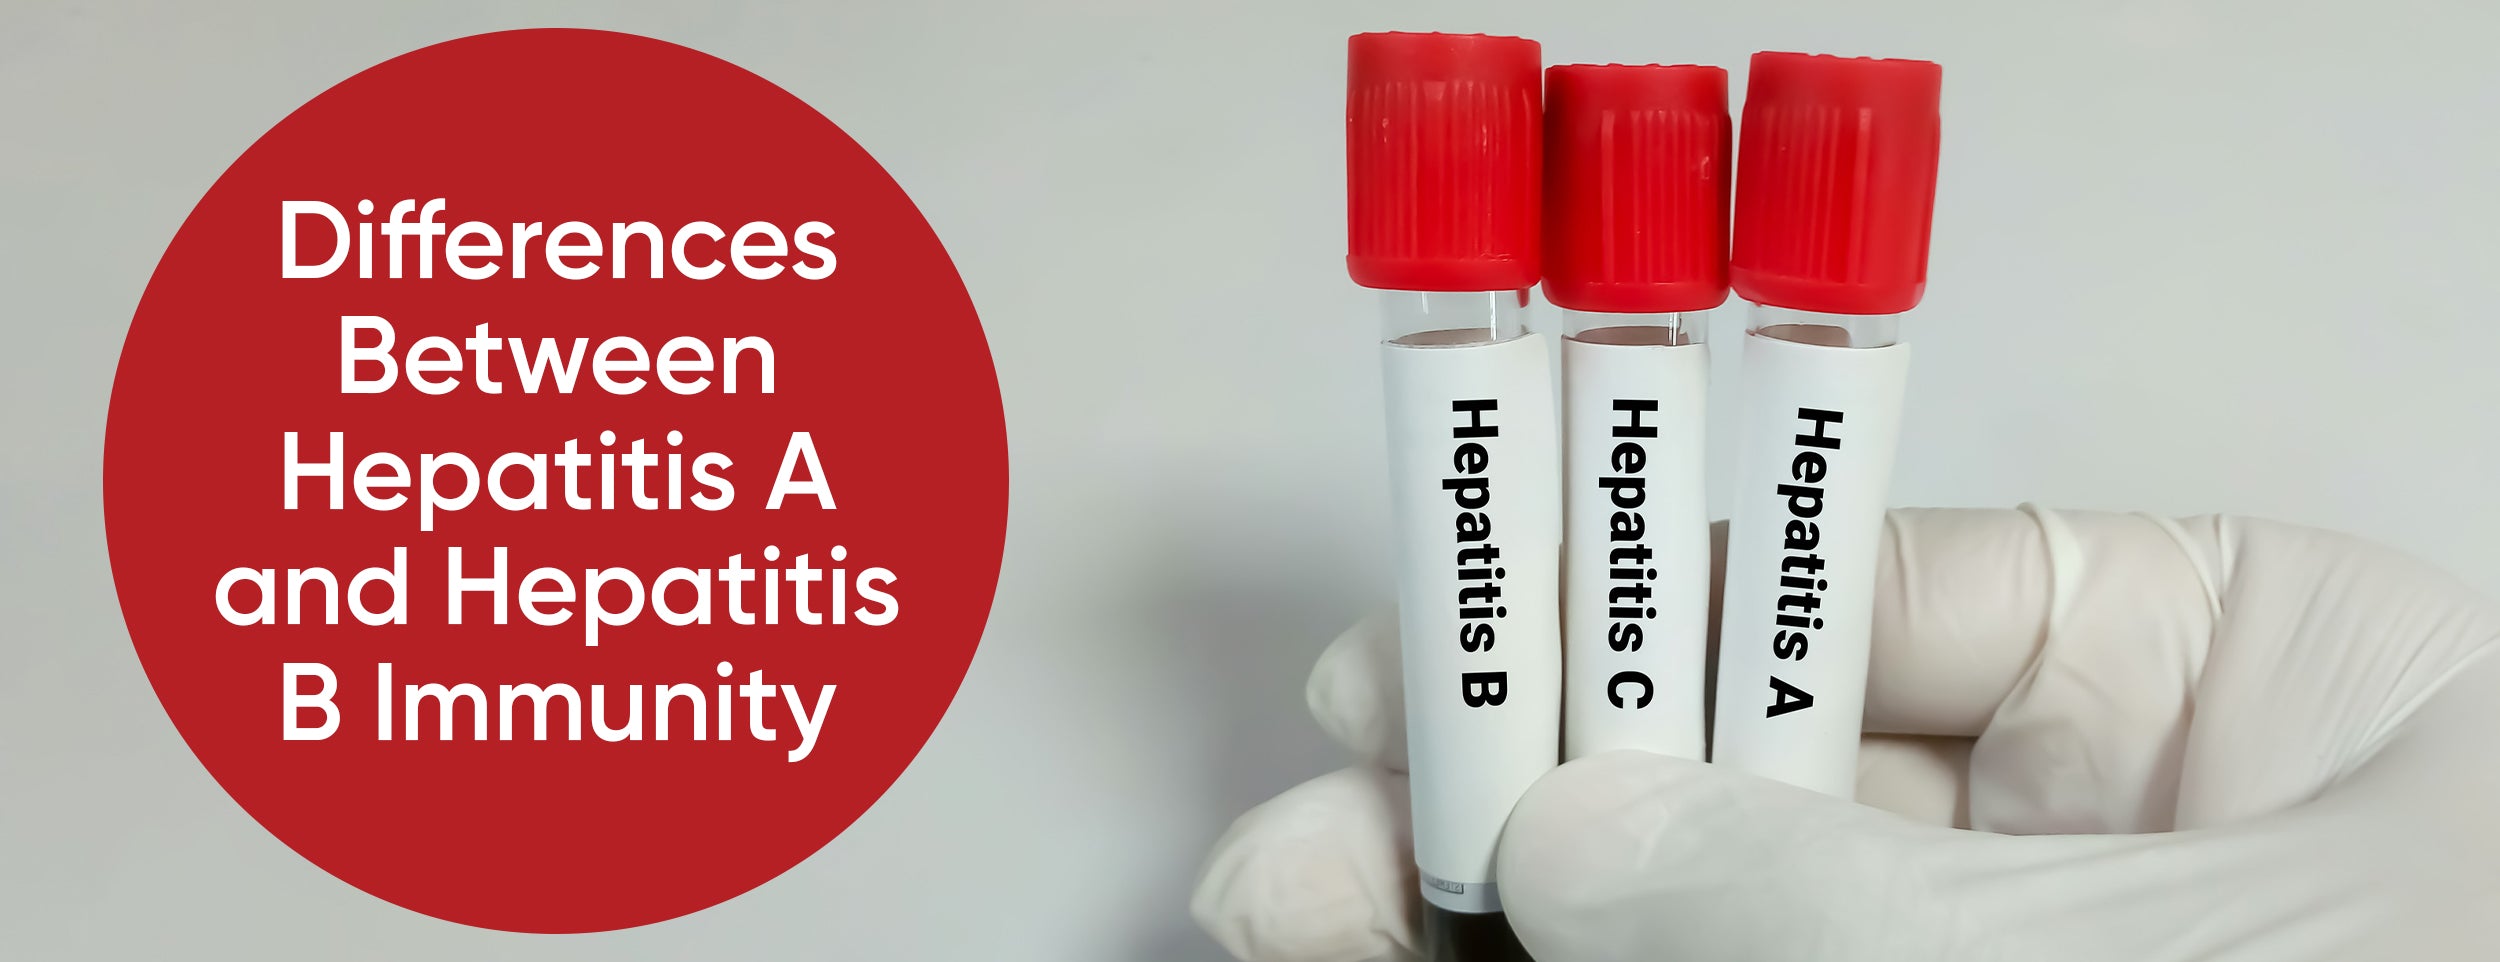 Hepatitis B and A Immunity Differences